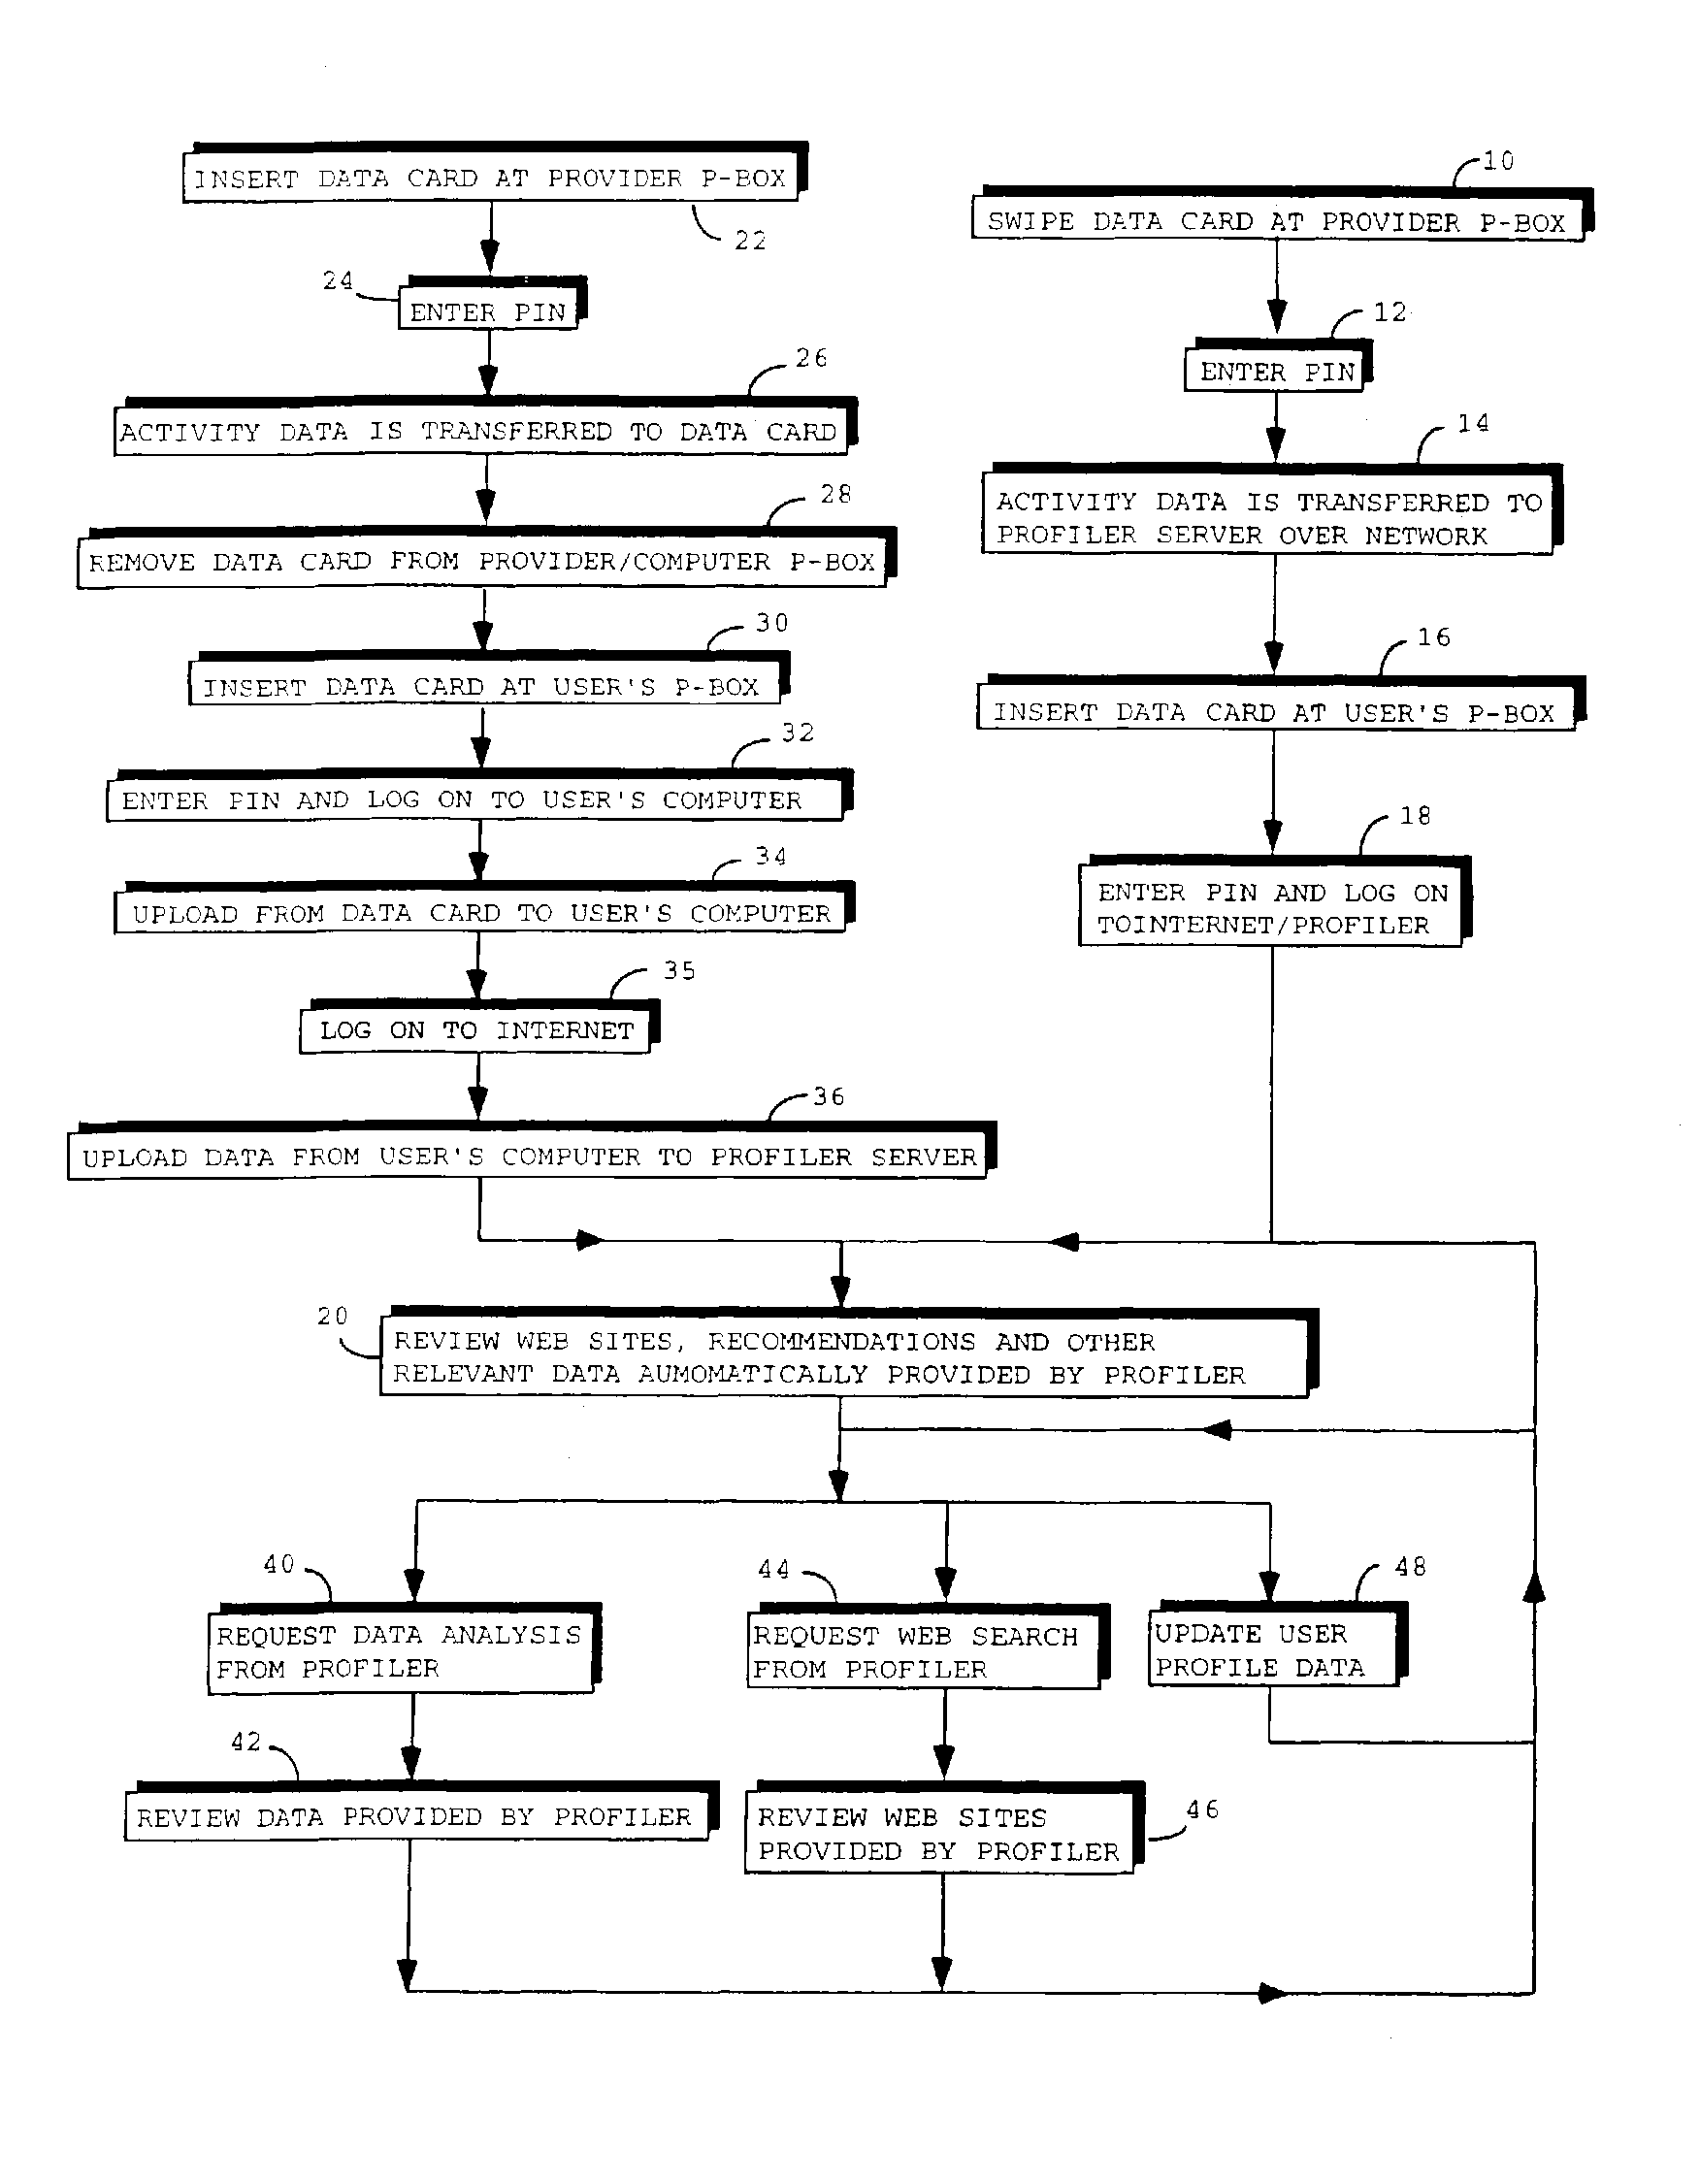 Method for providing information and recommendations based on user activity